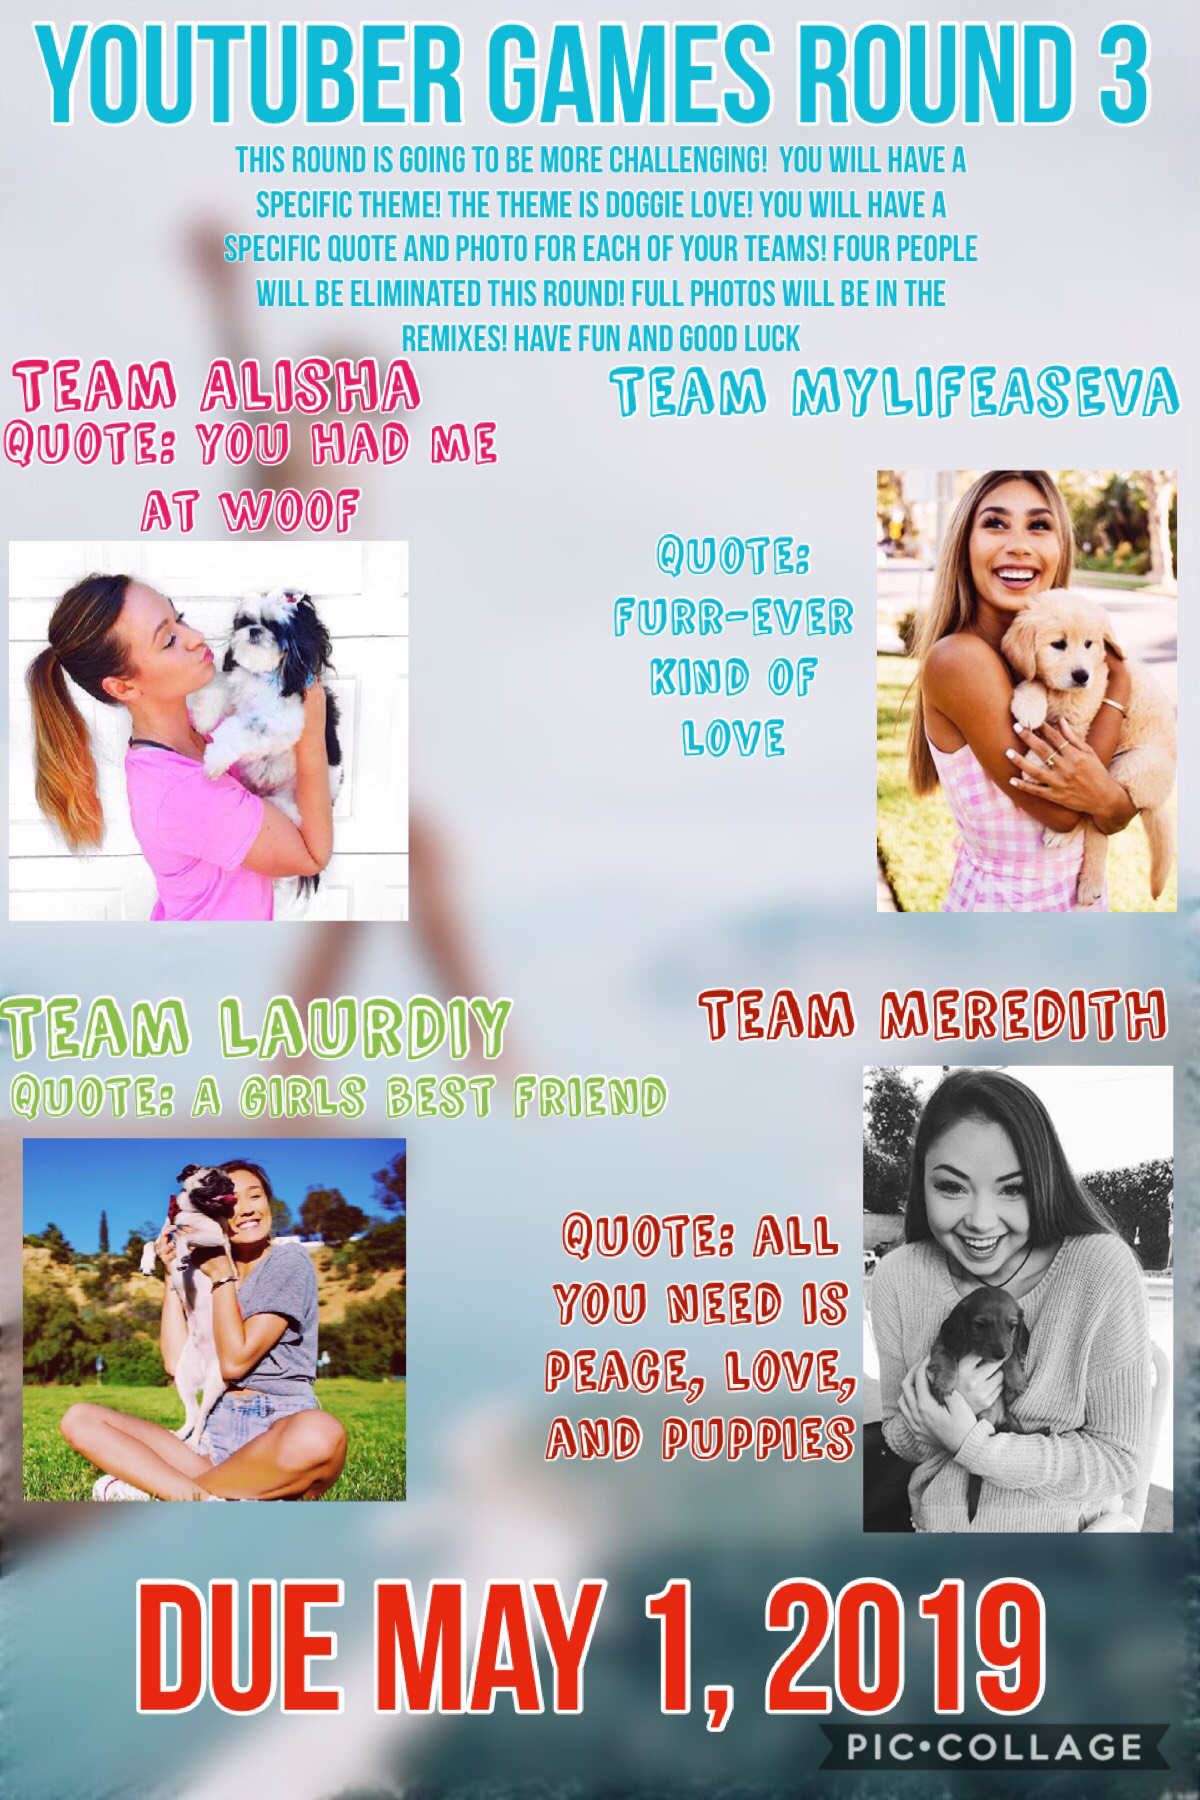 YouTuber Games Round 3! Good Luck! Full photo will be in the remixes! DUE MAY 1!💓🌟